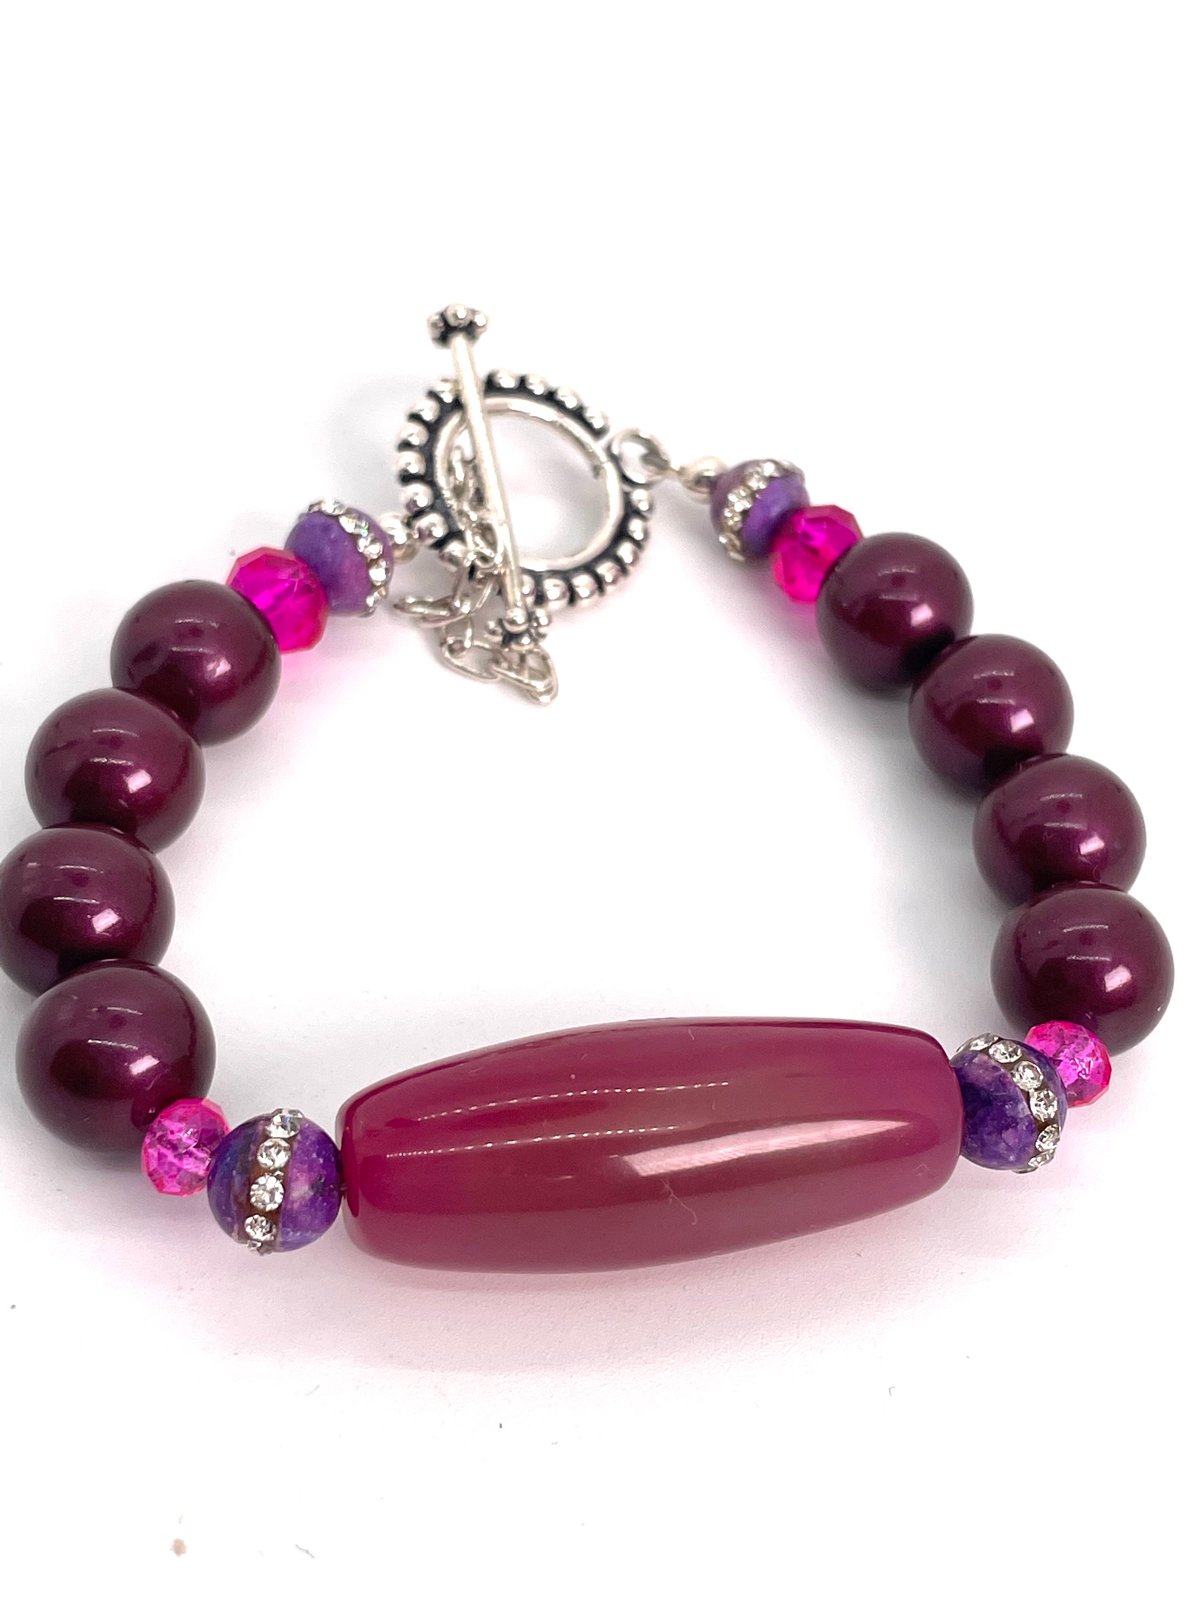 Agate and pearl matching bracelet sold separately